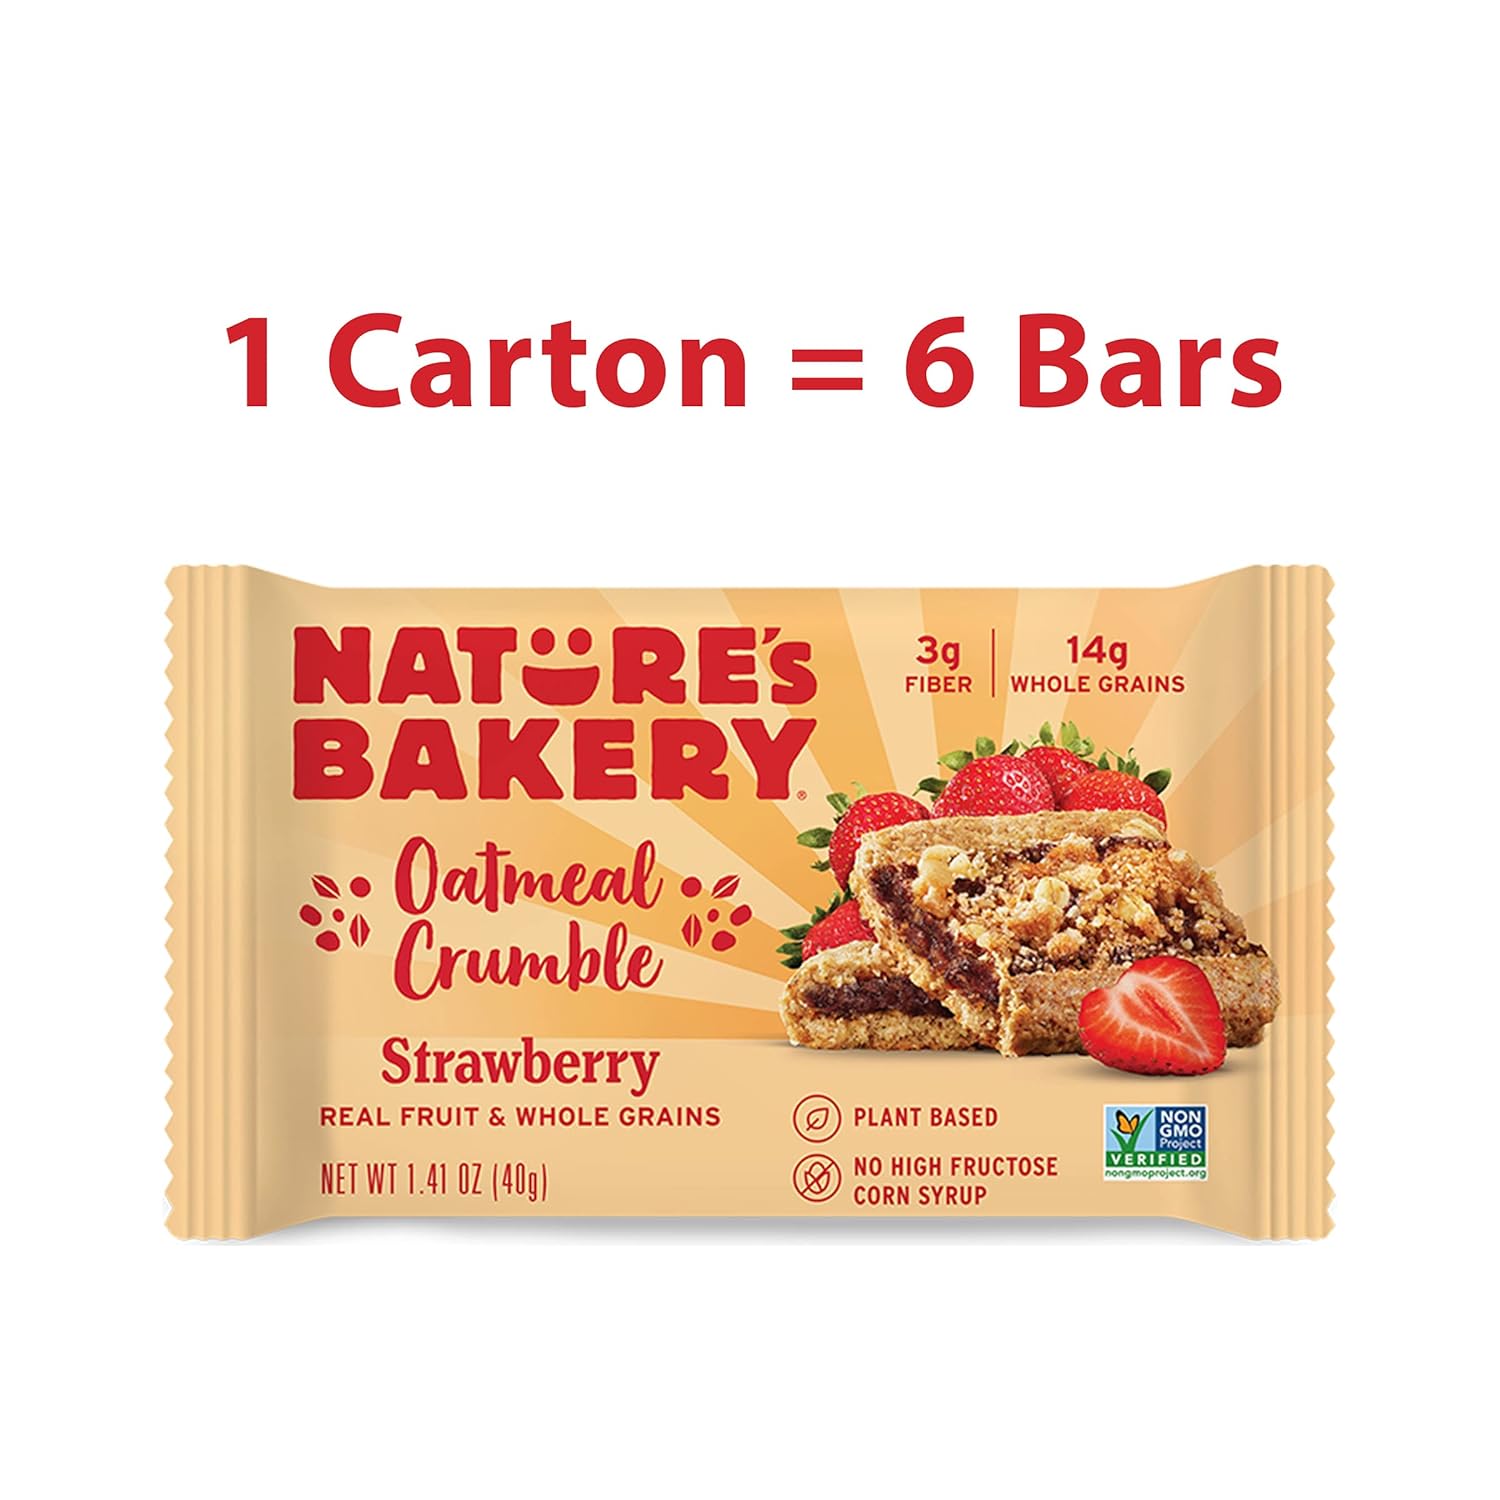 Natures Bakery Bar Oatmeal Crumble Strawberry, 8.46 oz. Packaging